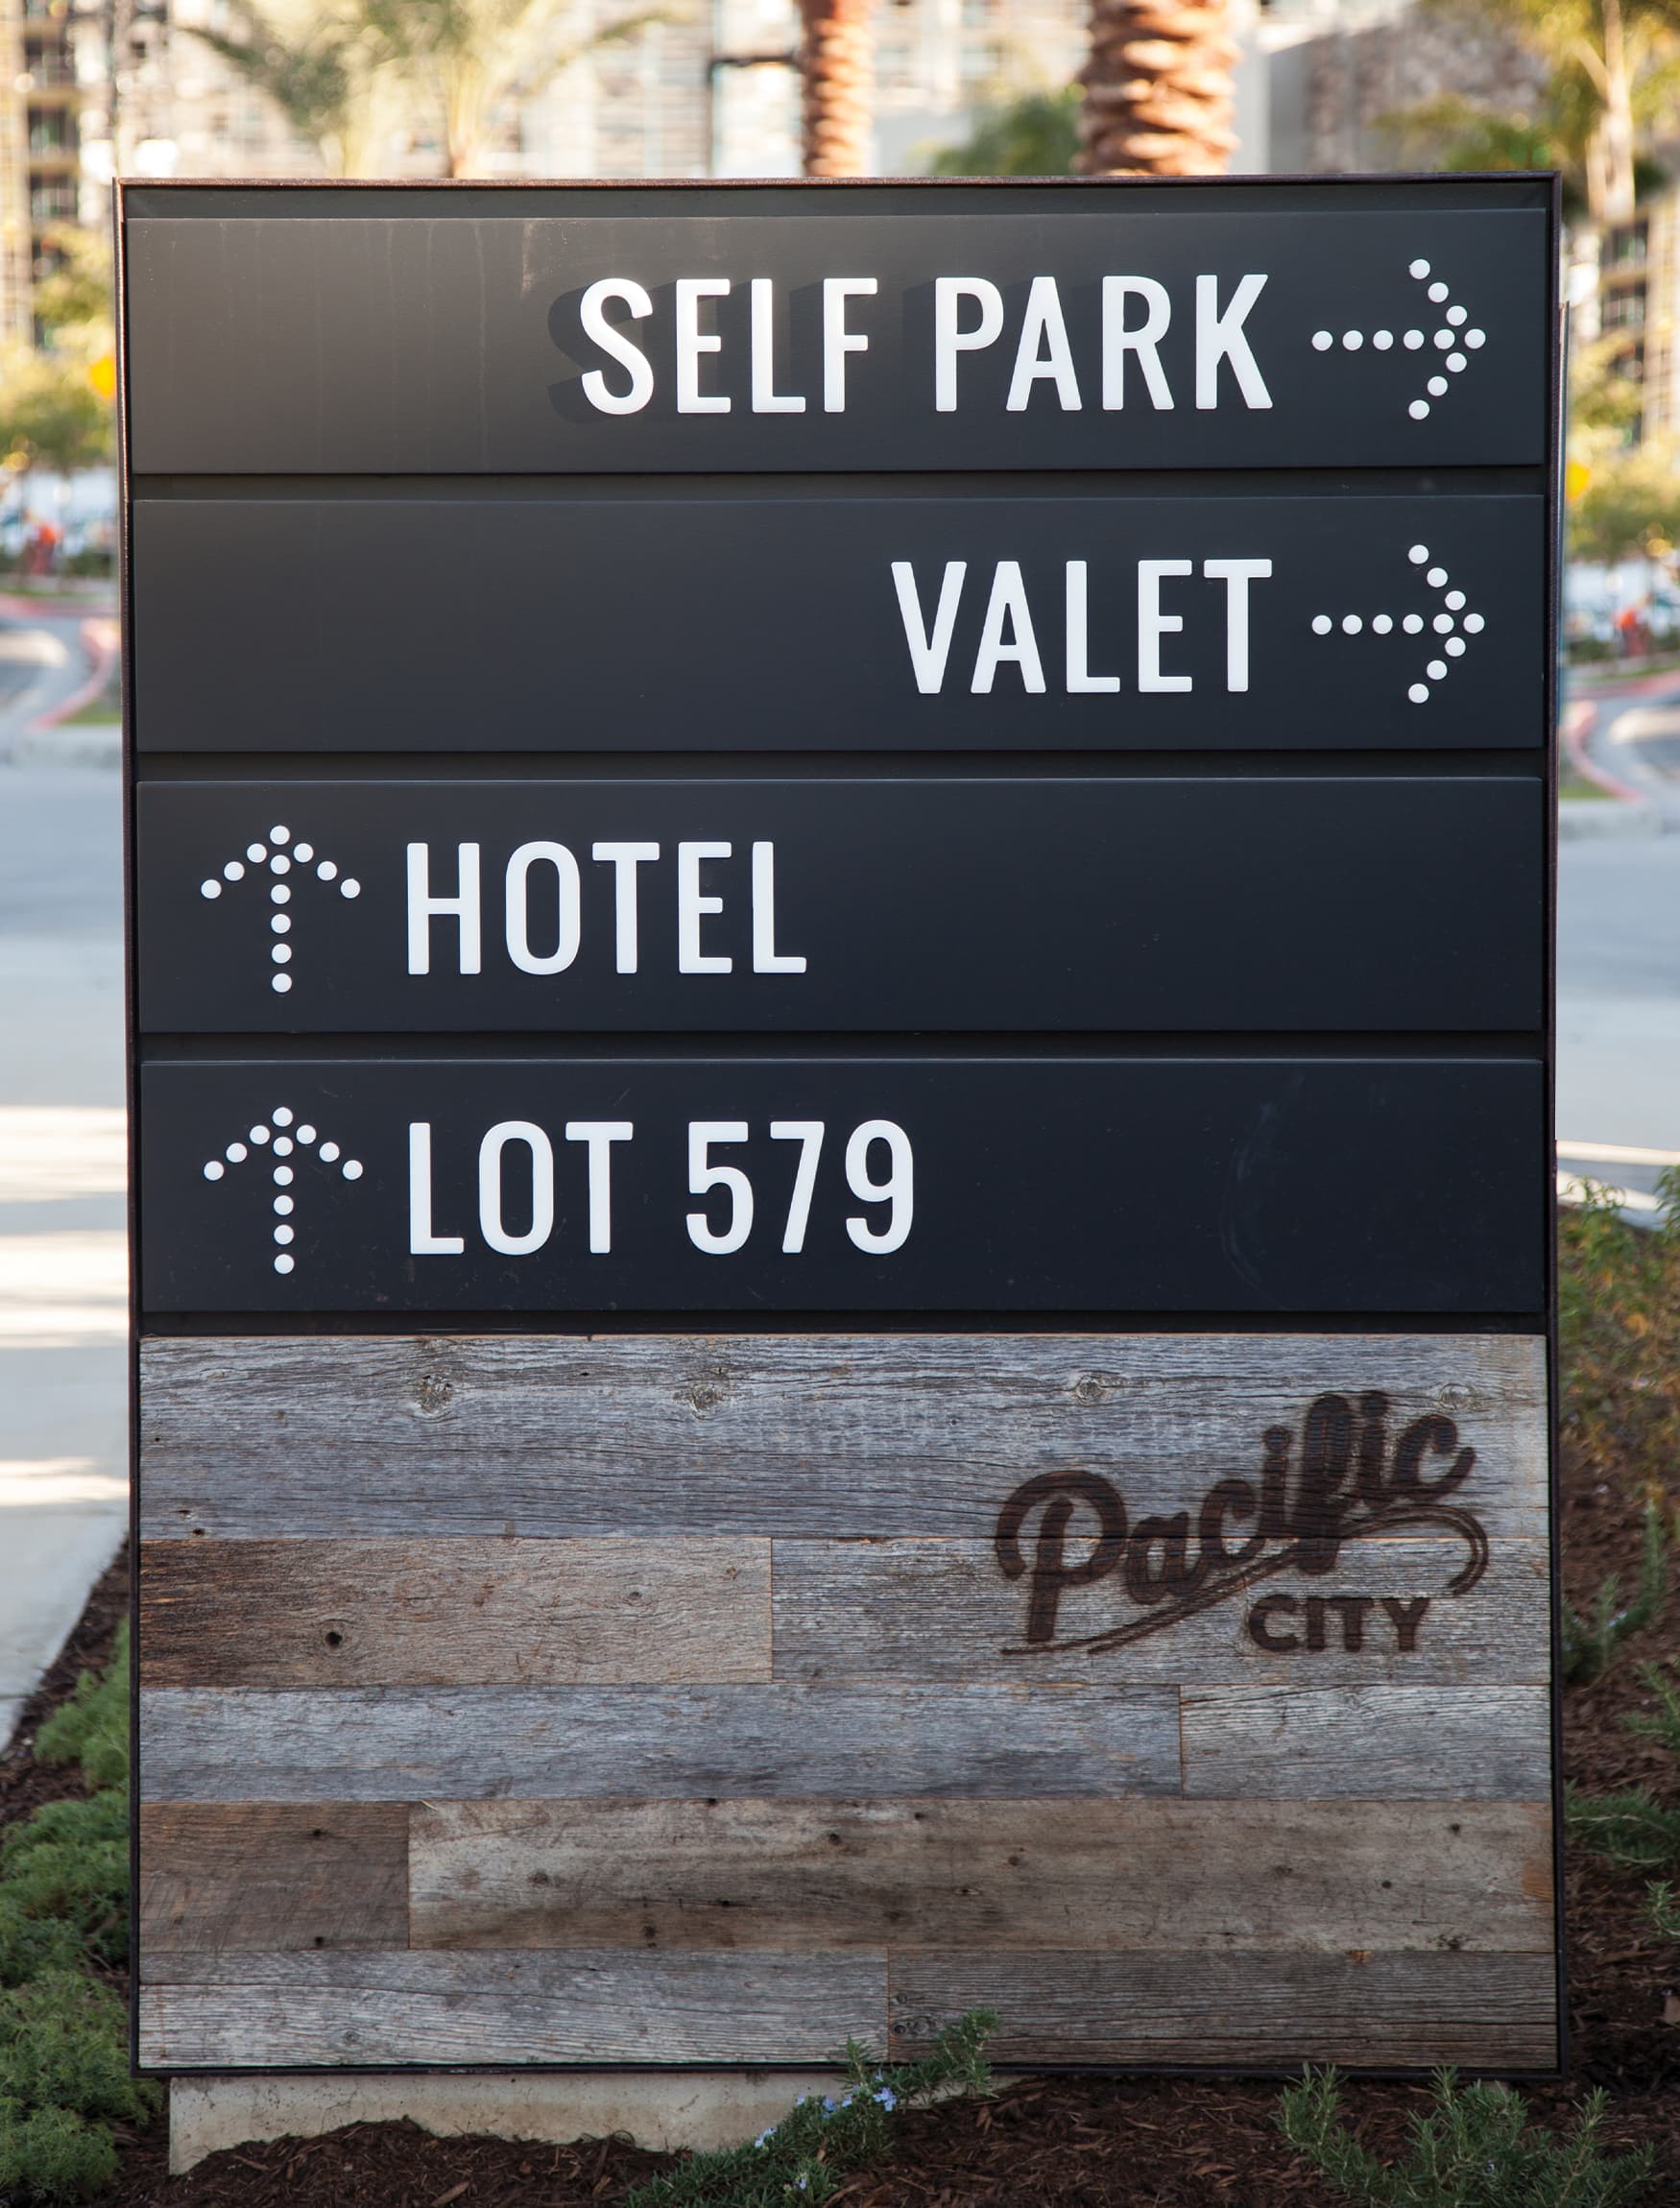 Pacific City waterfront retail project vehicular wayfinding system design